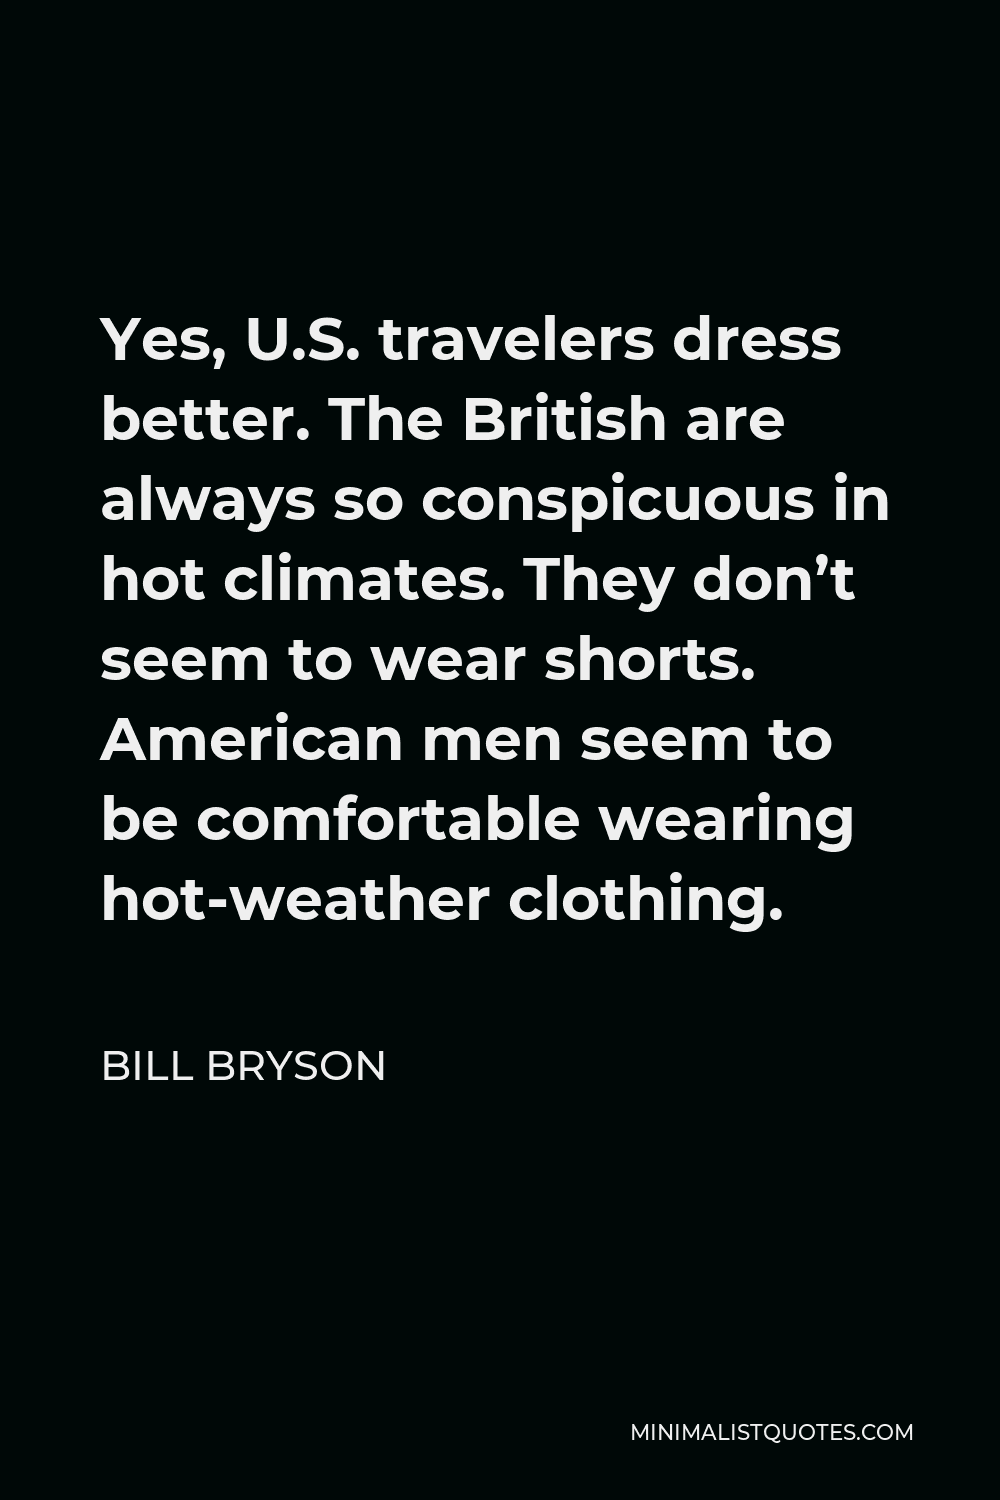 Bill Bryson Quote - Yes, U.S. travelers dress better. The British are always so conspicuous in hot climates. They don’t seem to wear shorts. American men seem to be comfortable wearing hot-weather clothing.